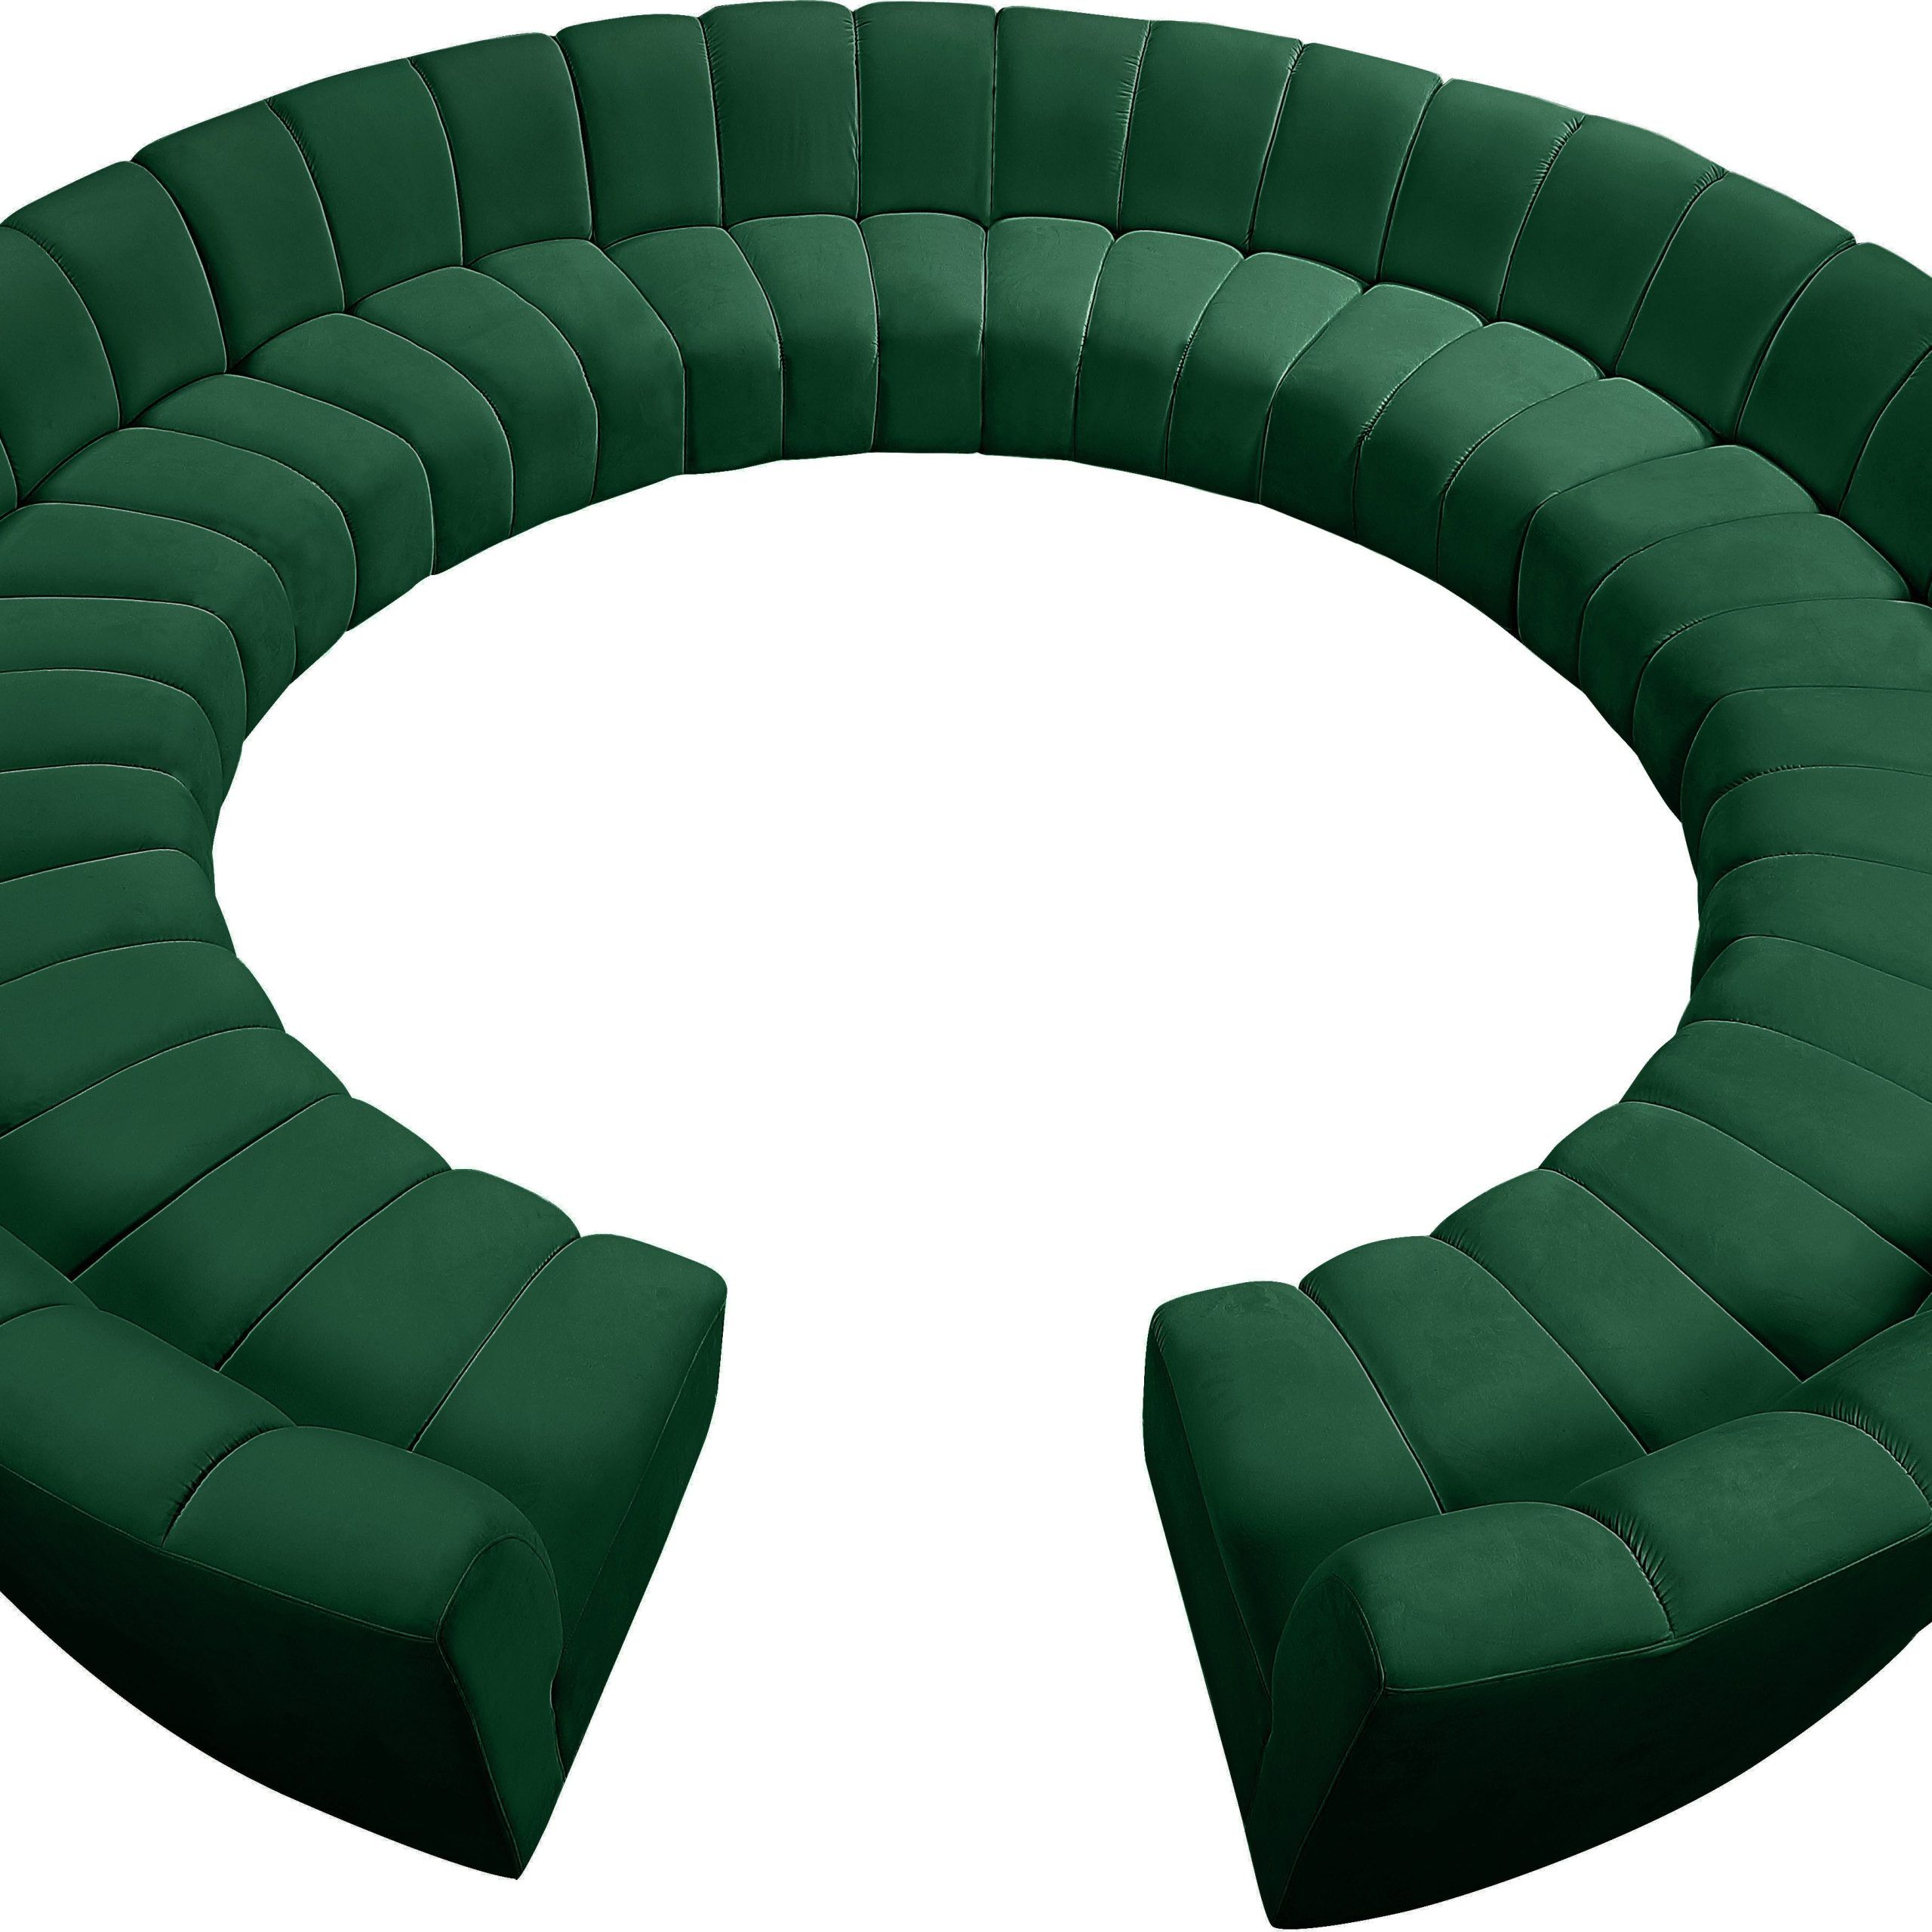 Meridian Furniture Infinity Mrd 638green 12pc, Elegant And Eye Catching In Green Velvet Modular Sectionals (View 5 of 20)